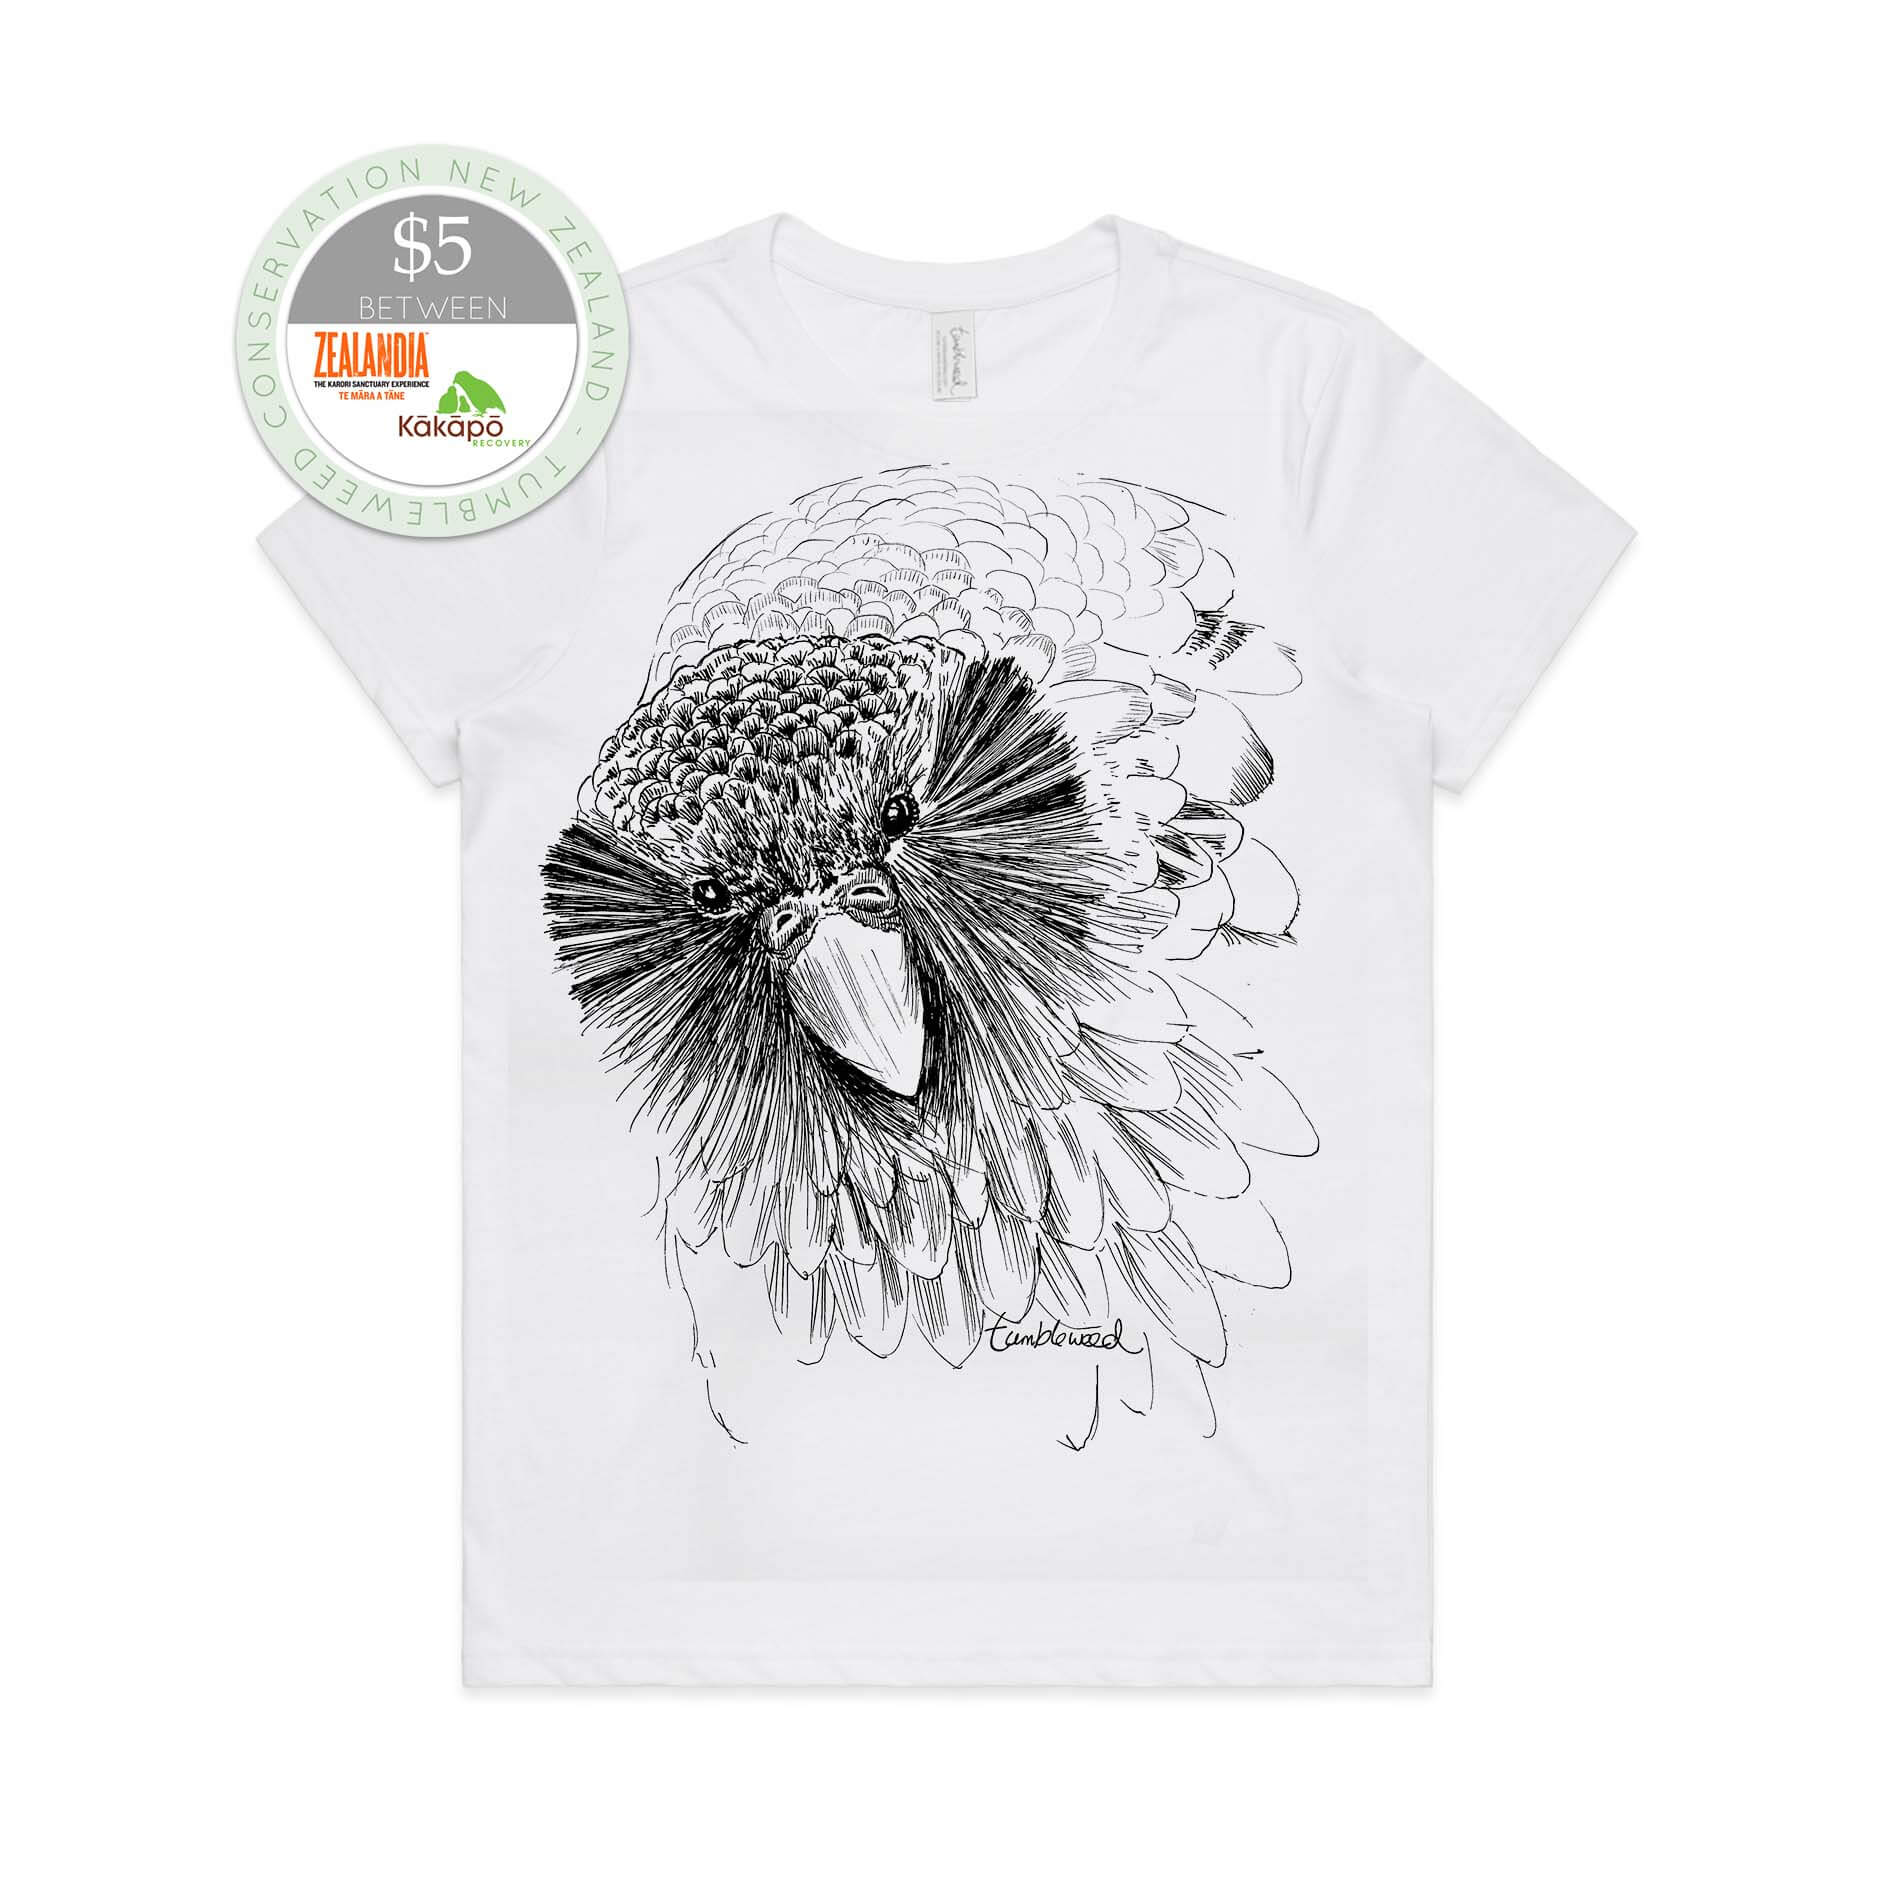 White, female t-shirt featuring a screen printed Sirocco the Kākāpō design.